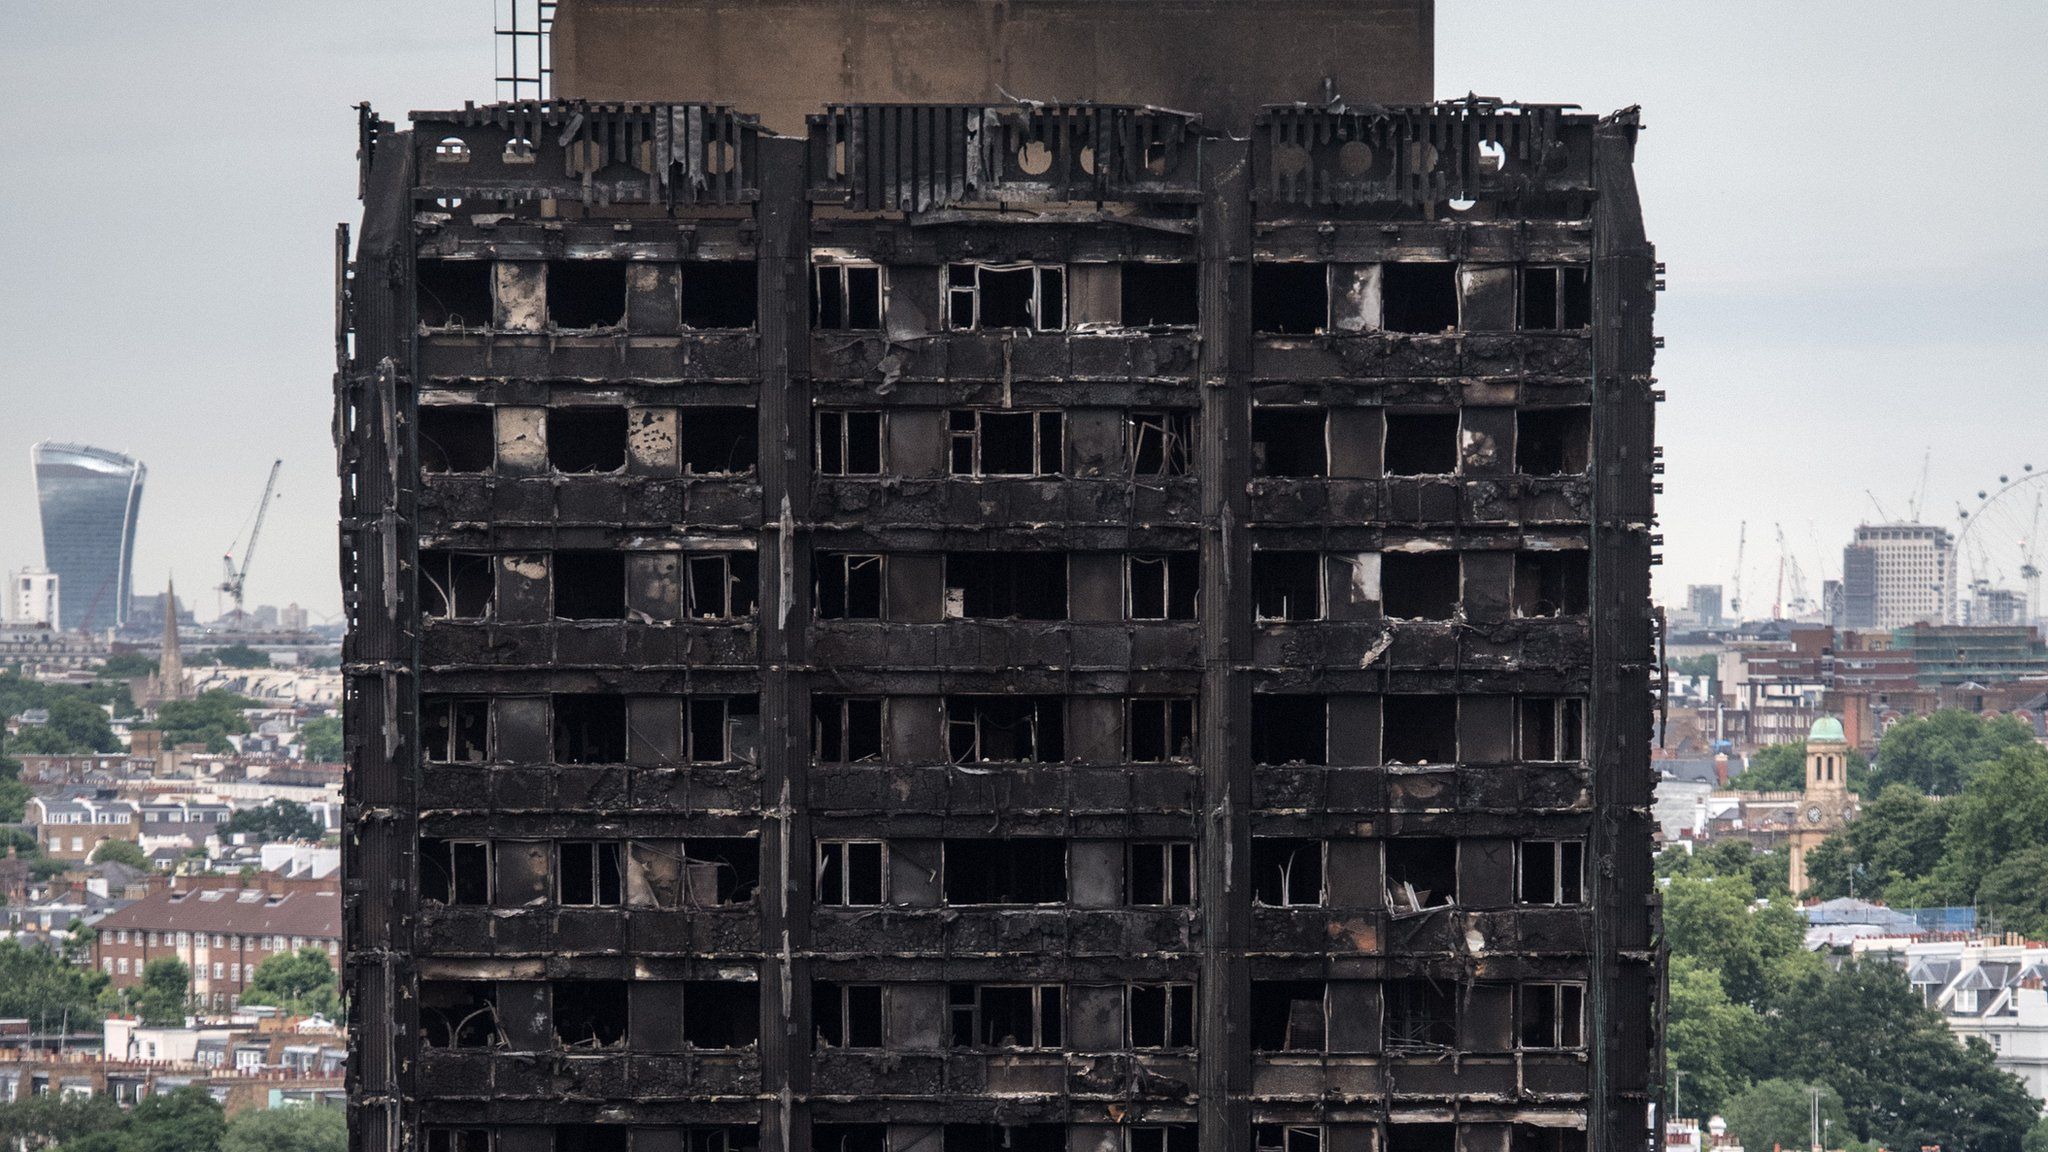 What remains of the top floors of Grenfell Tower